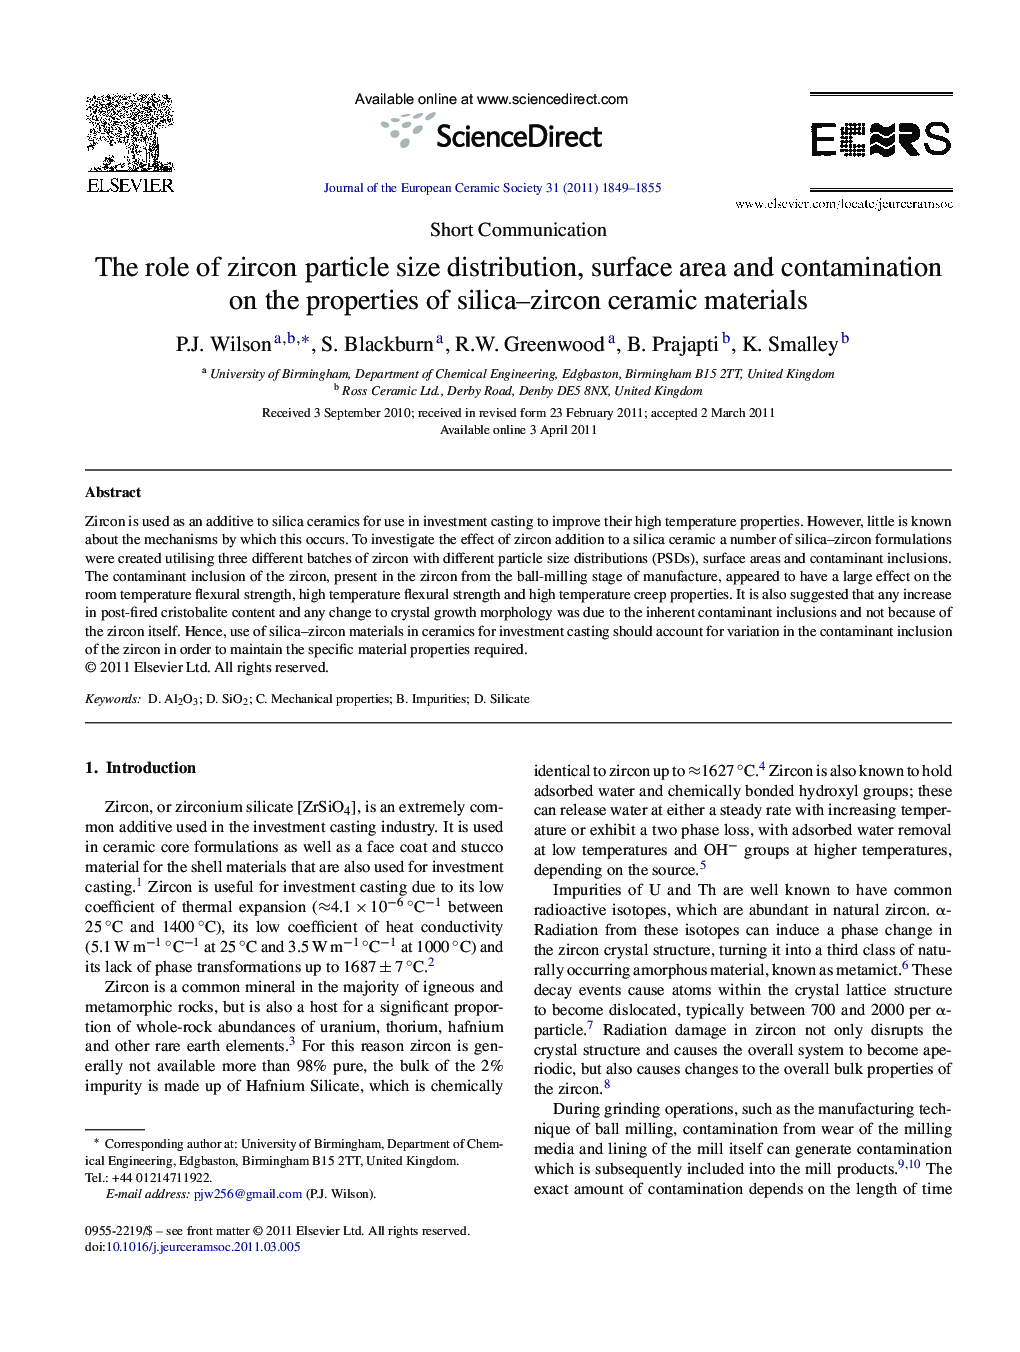 The role of zircon particle size distribution, surface area and contamination on the properties of silica–zircon ceramic materials